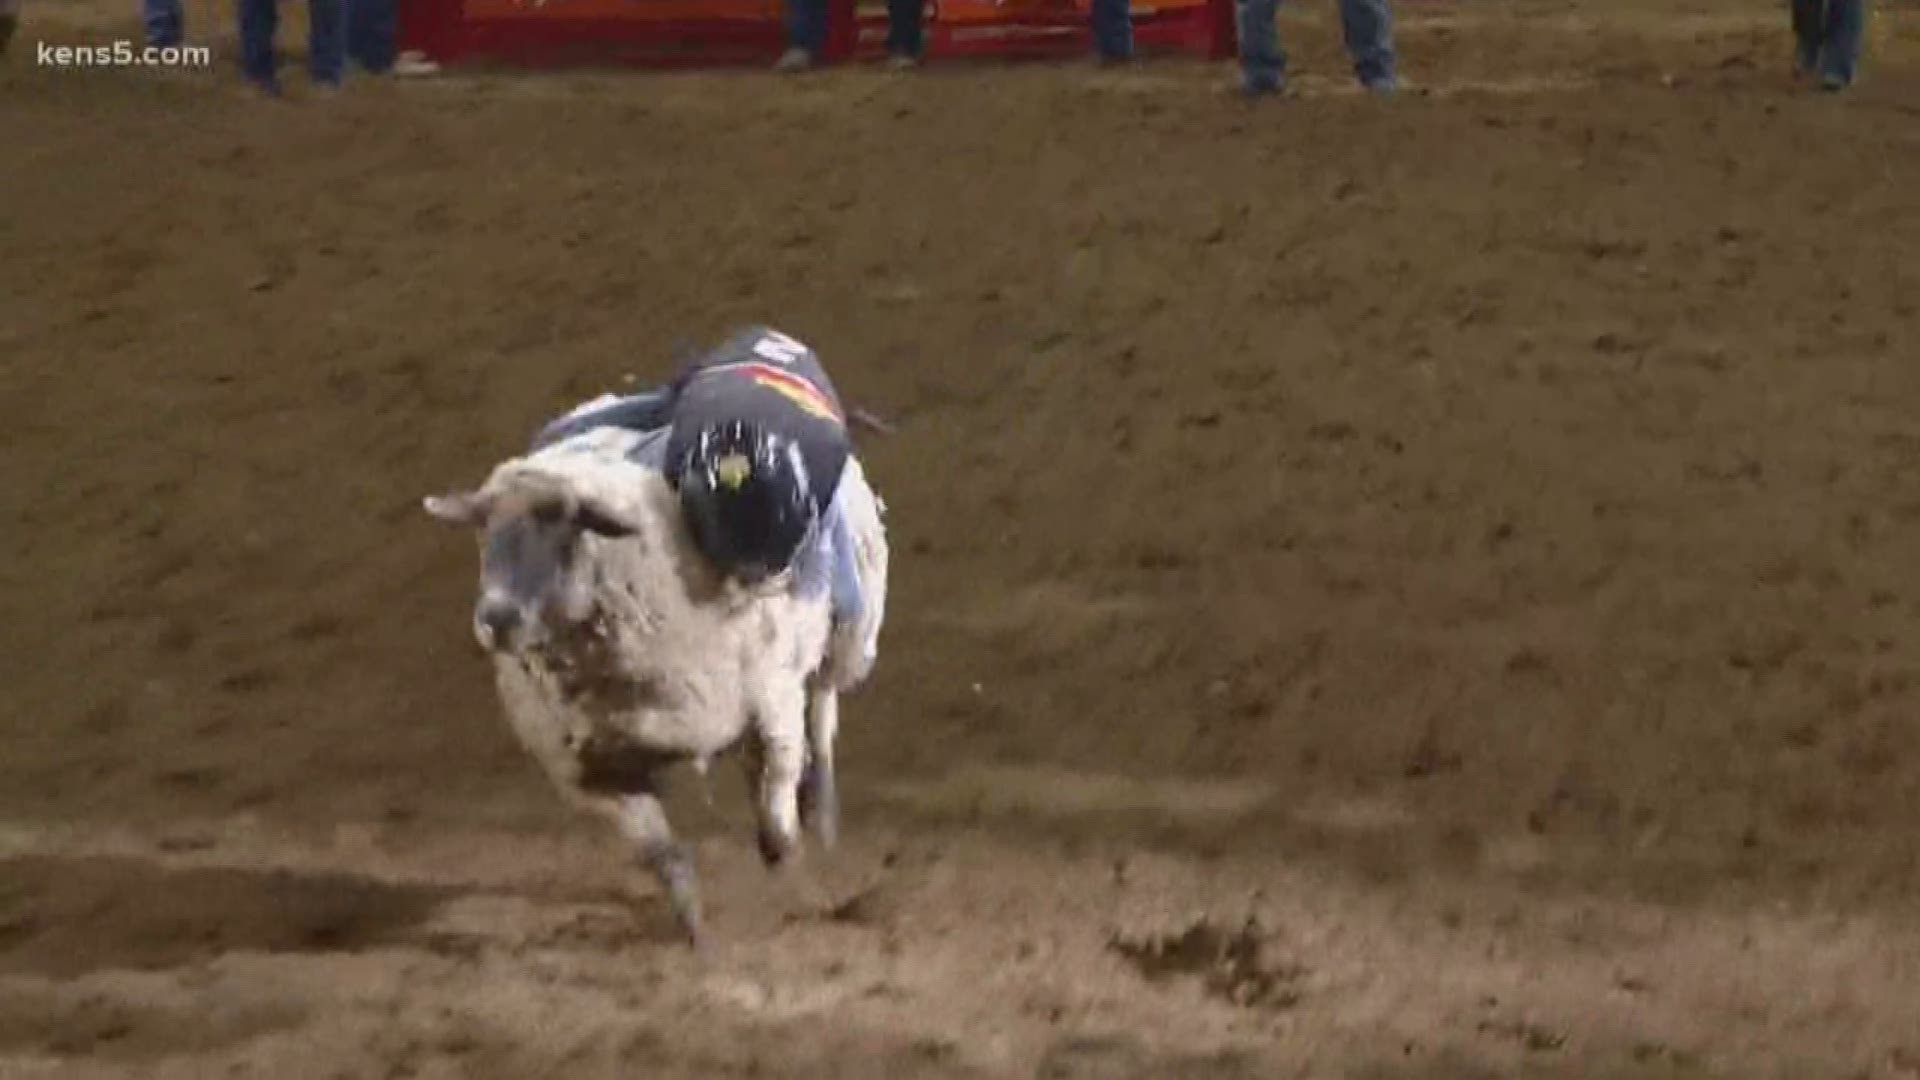 Josiah Tribble held on for 13 seconds, which SA Rodeo officials say ties an arena record.